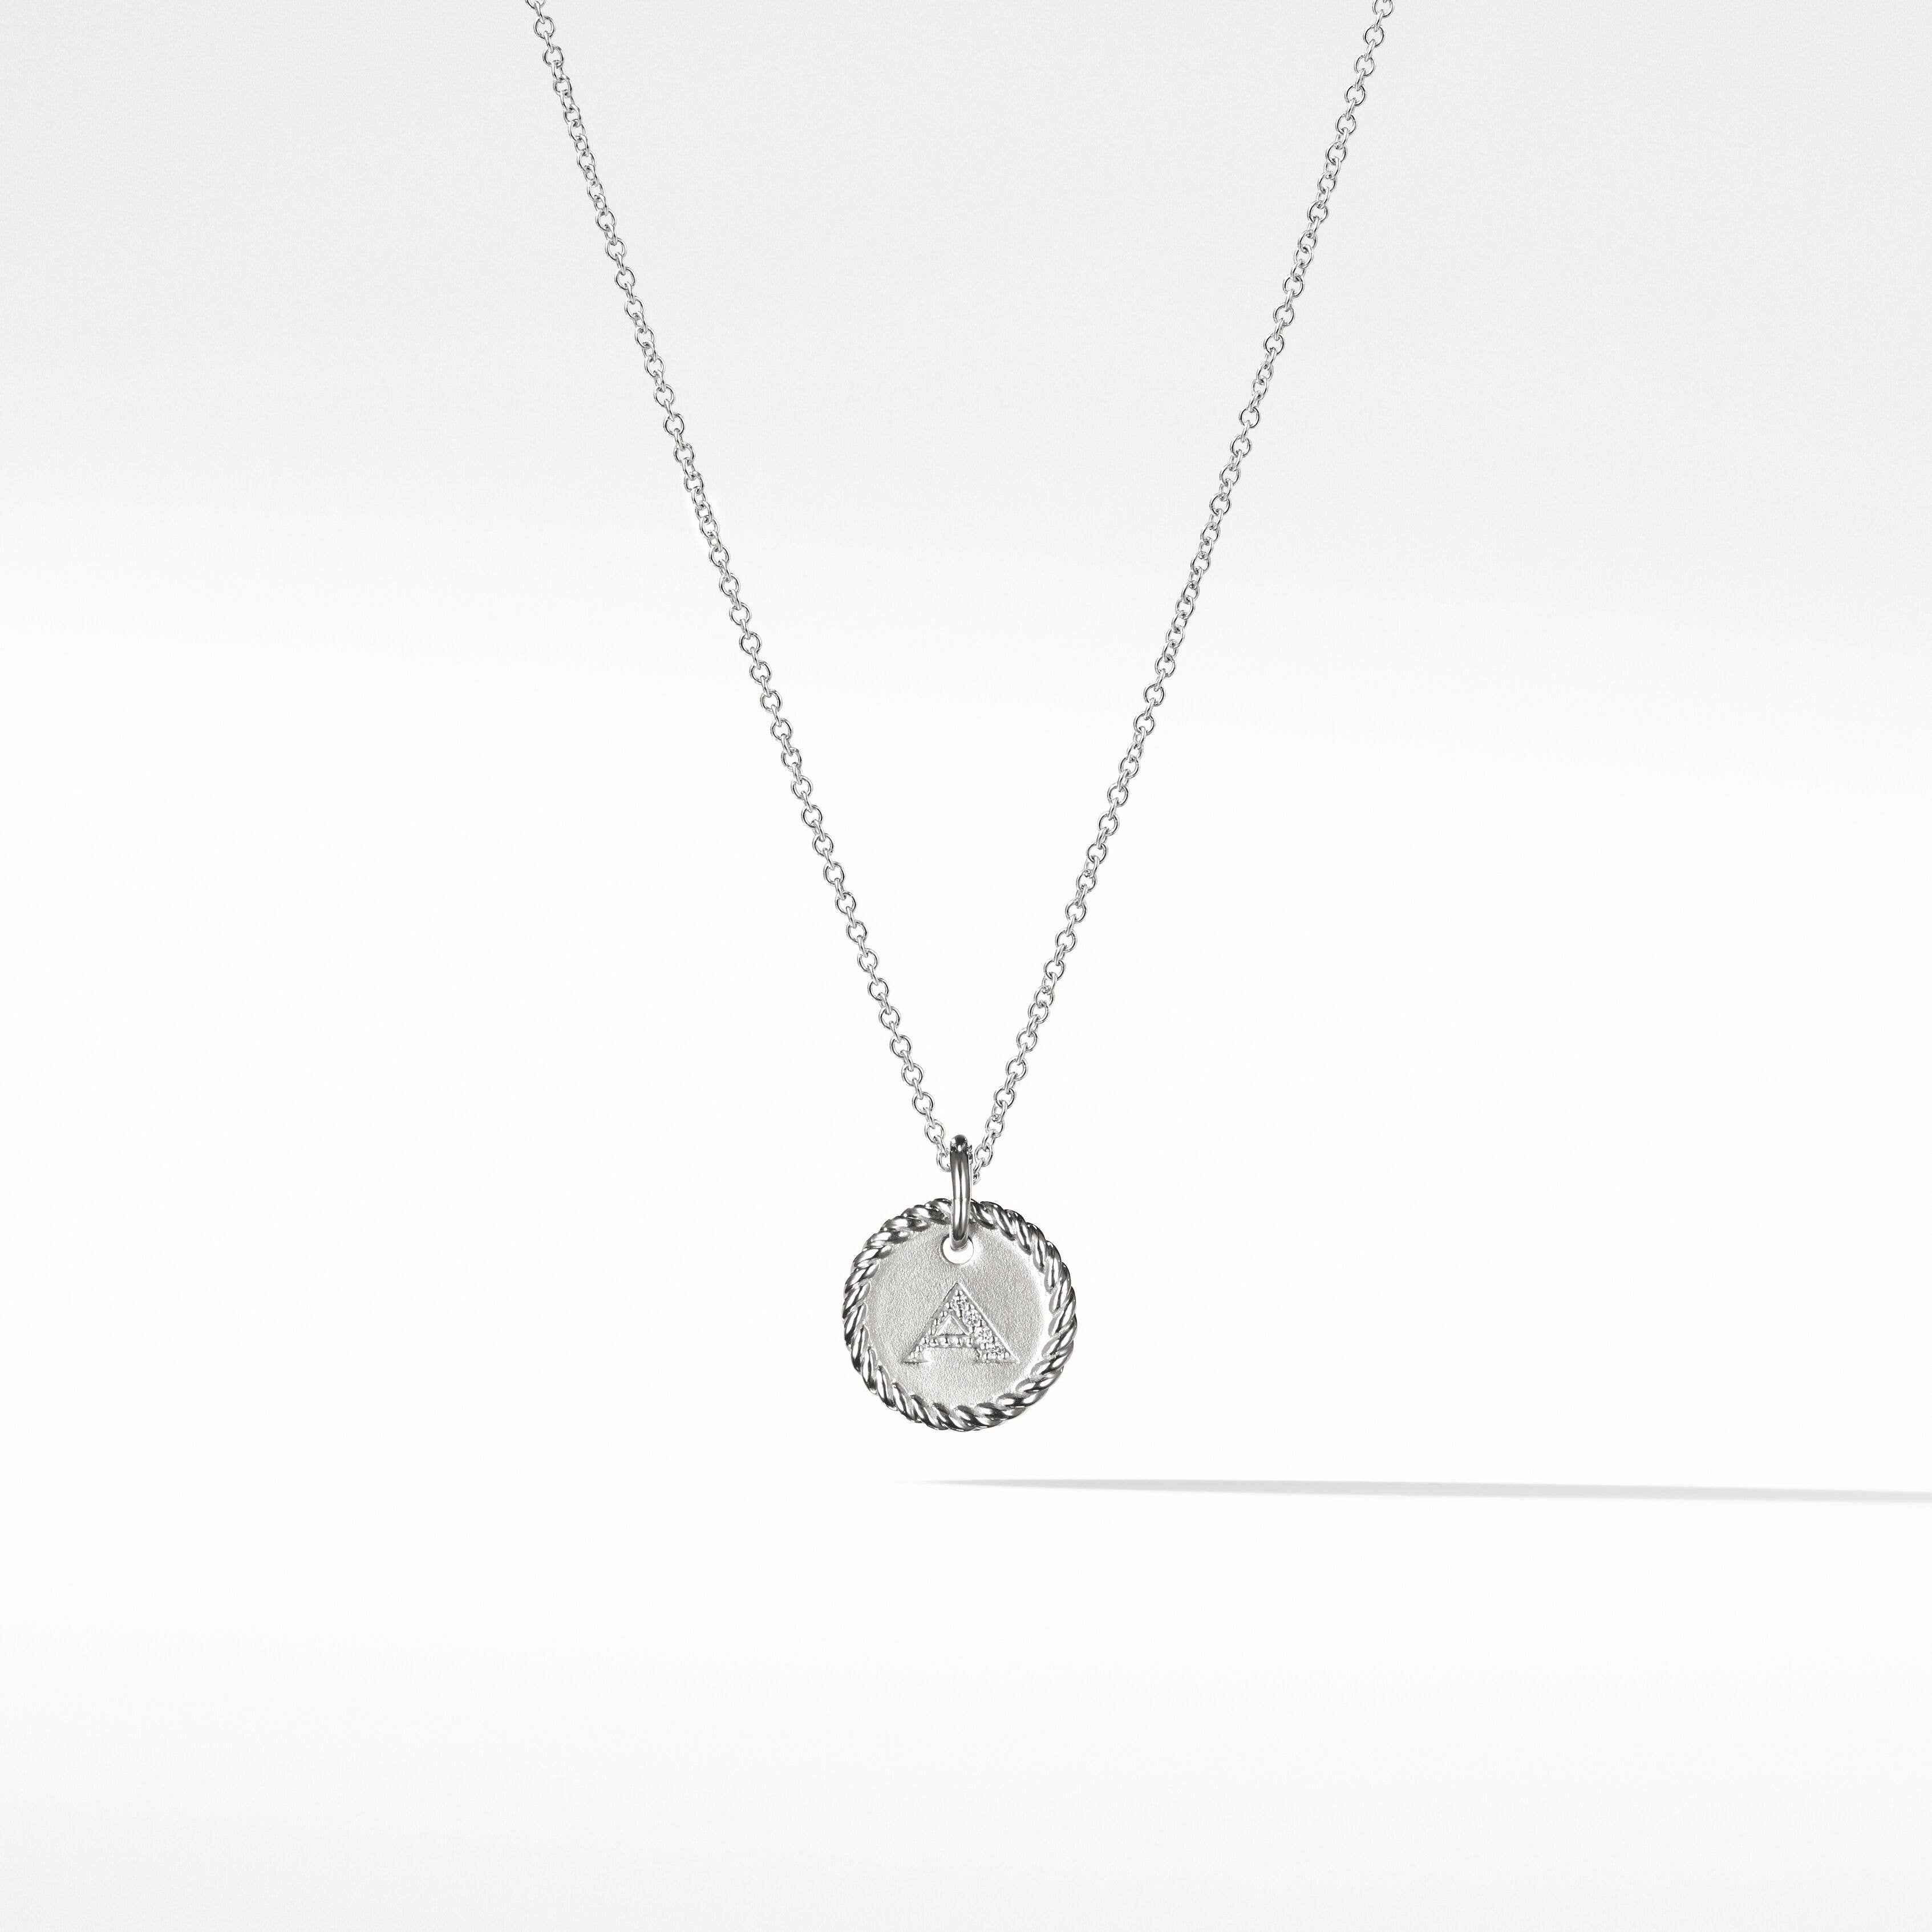 A Initial Charm Necklace in 18K White Gold with Pavé Diamonds